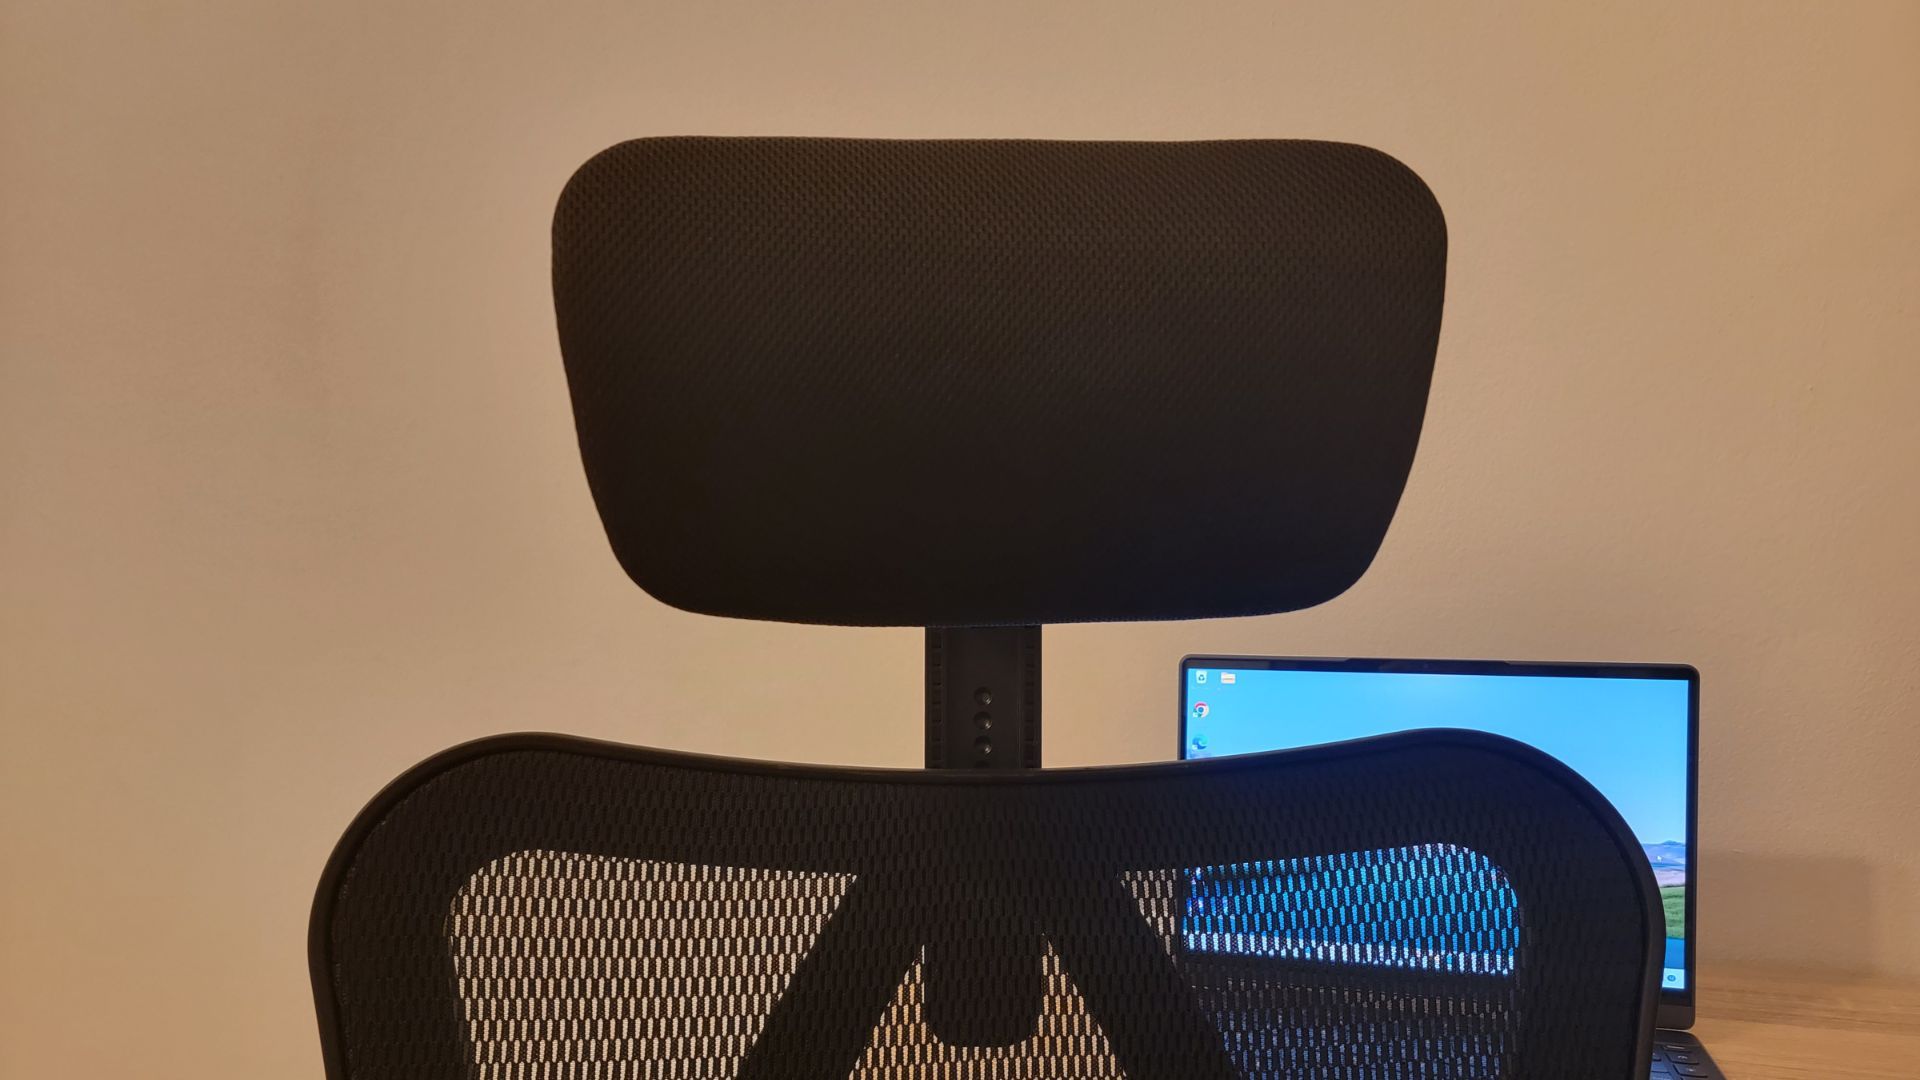 SIHOO M18 Office Chair Review 